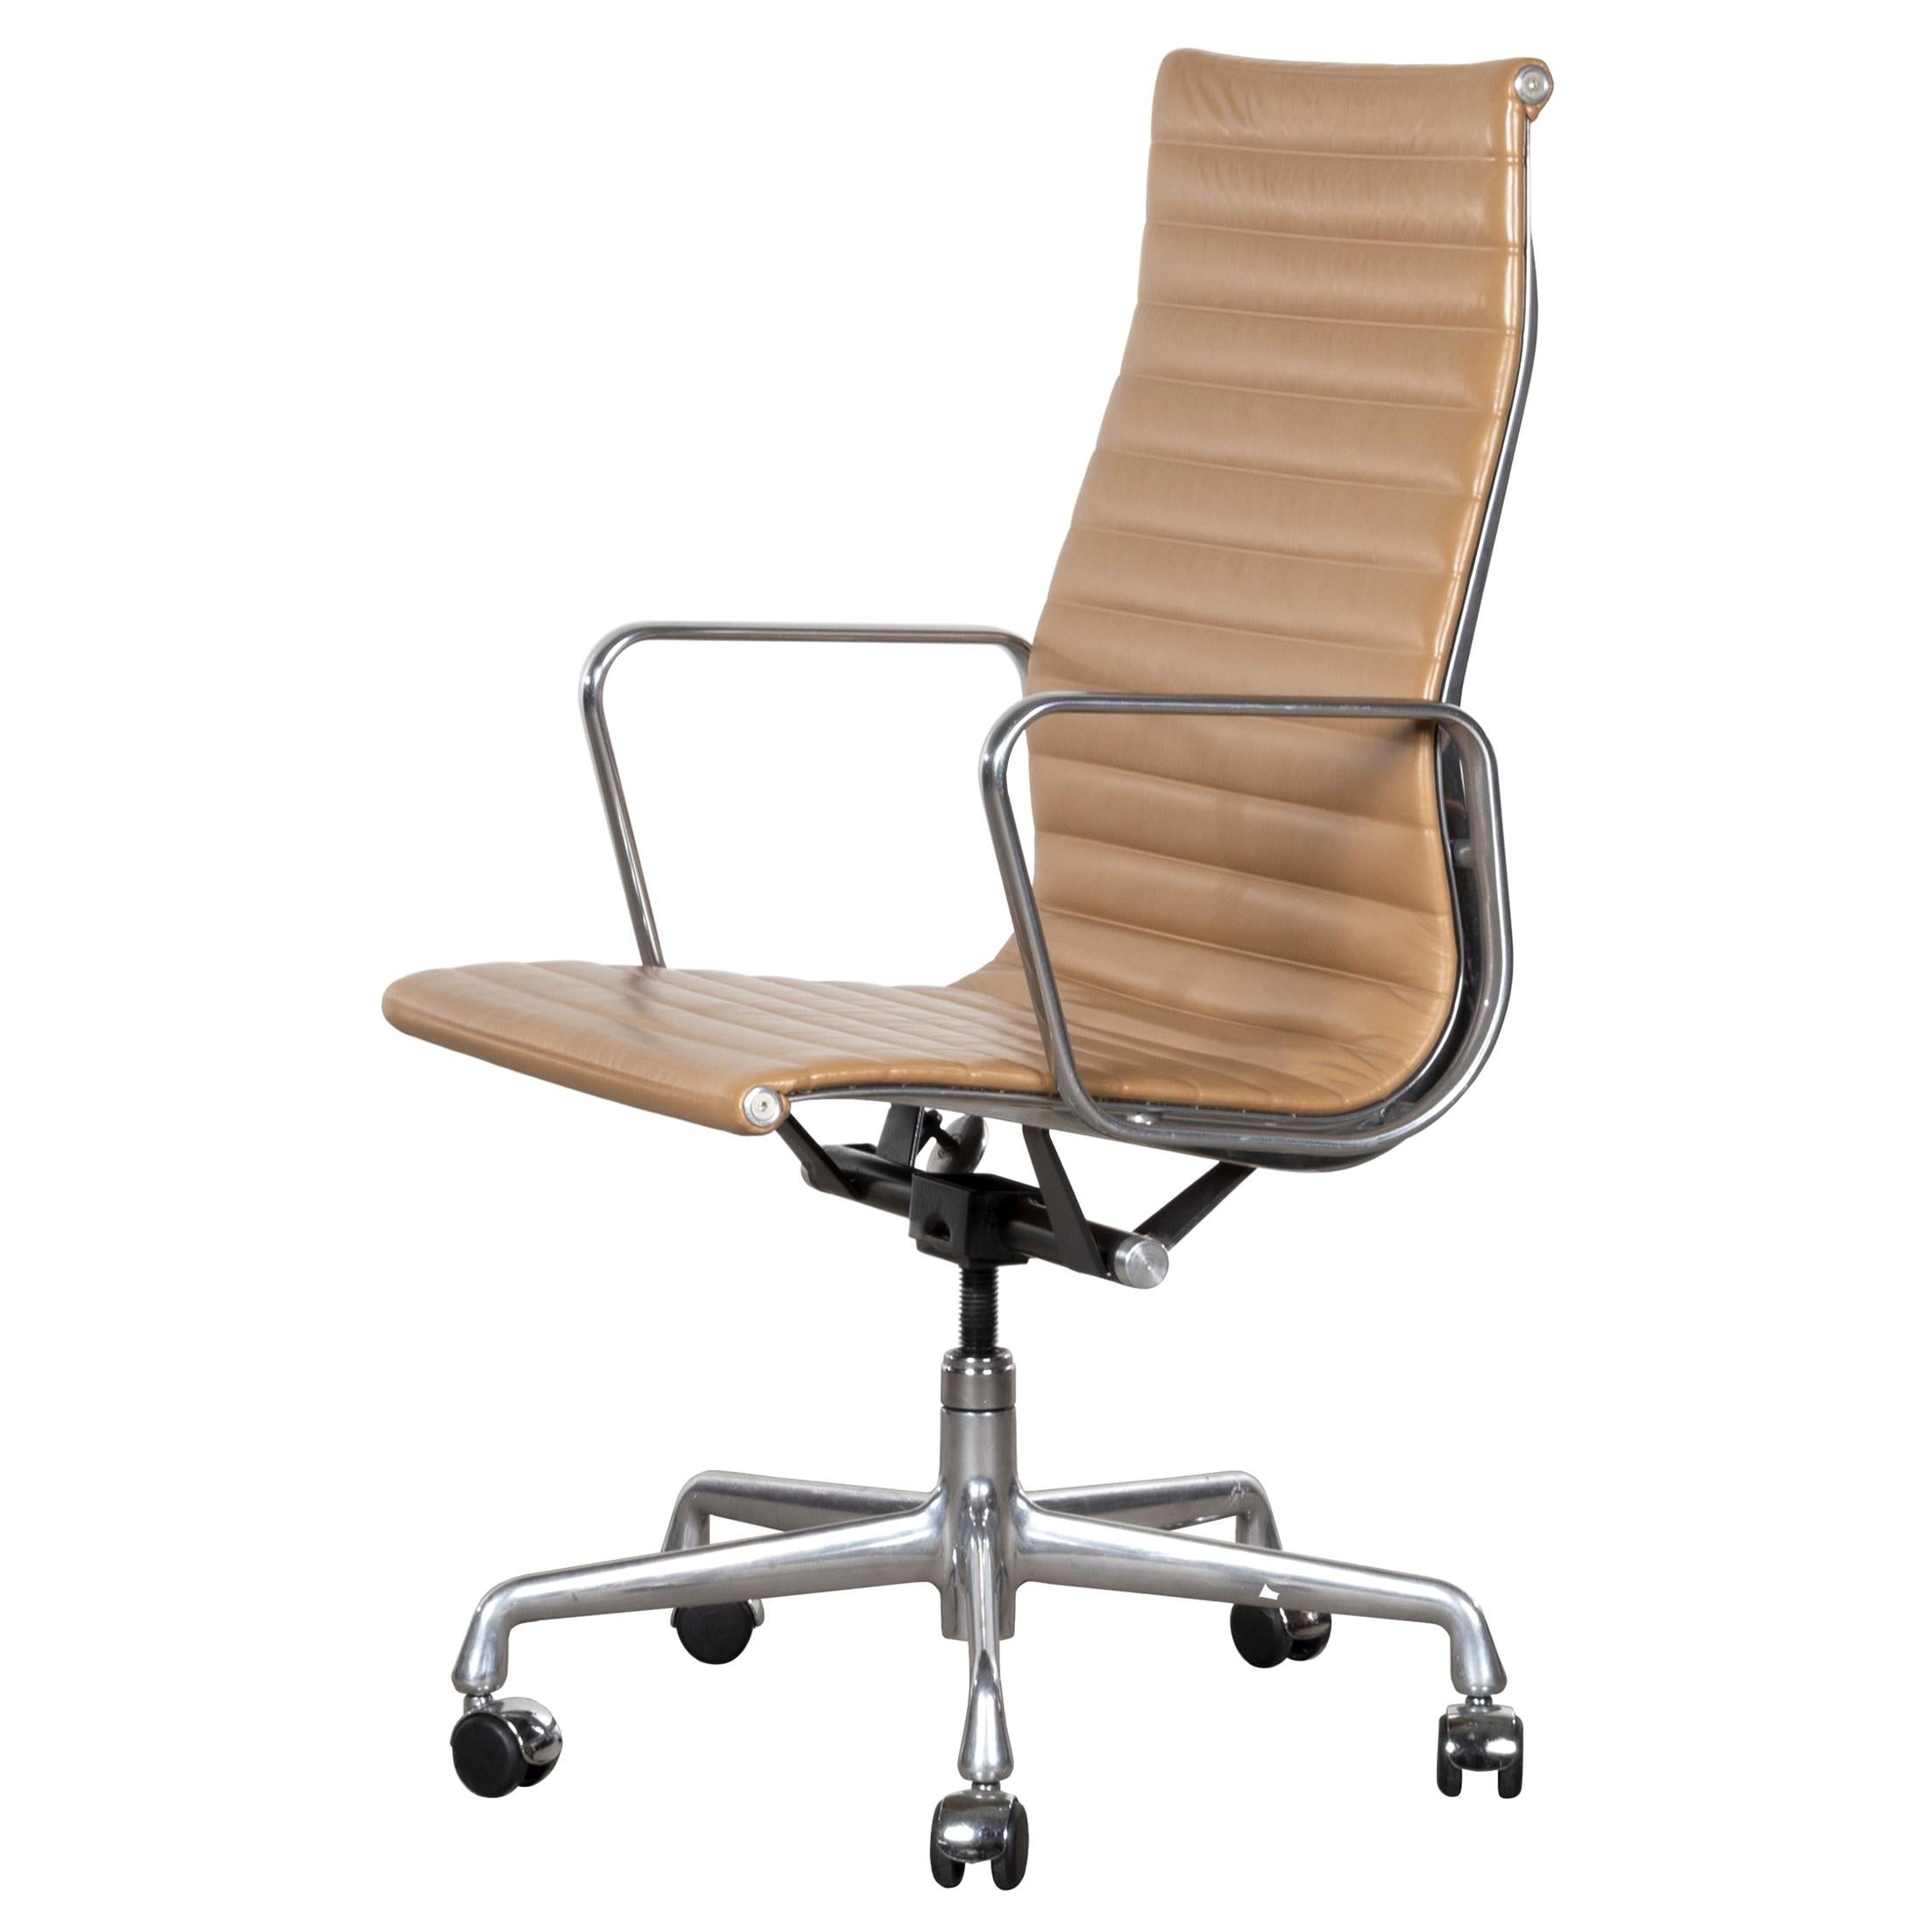 Eames Executive Office Chair in Cognac Leather for Herman Miller, USA